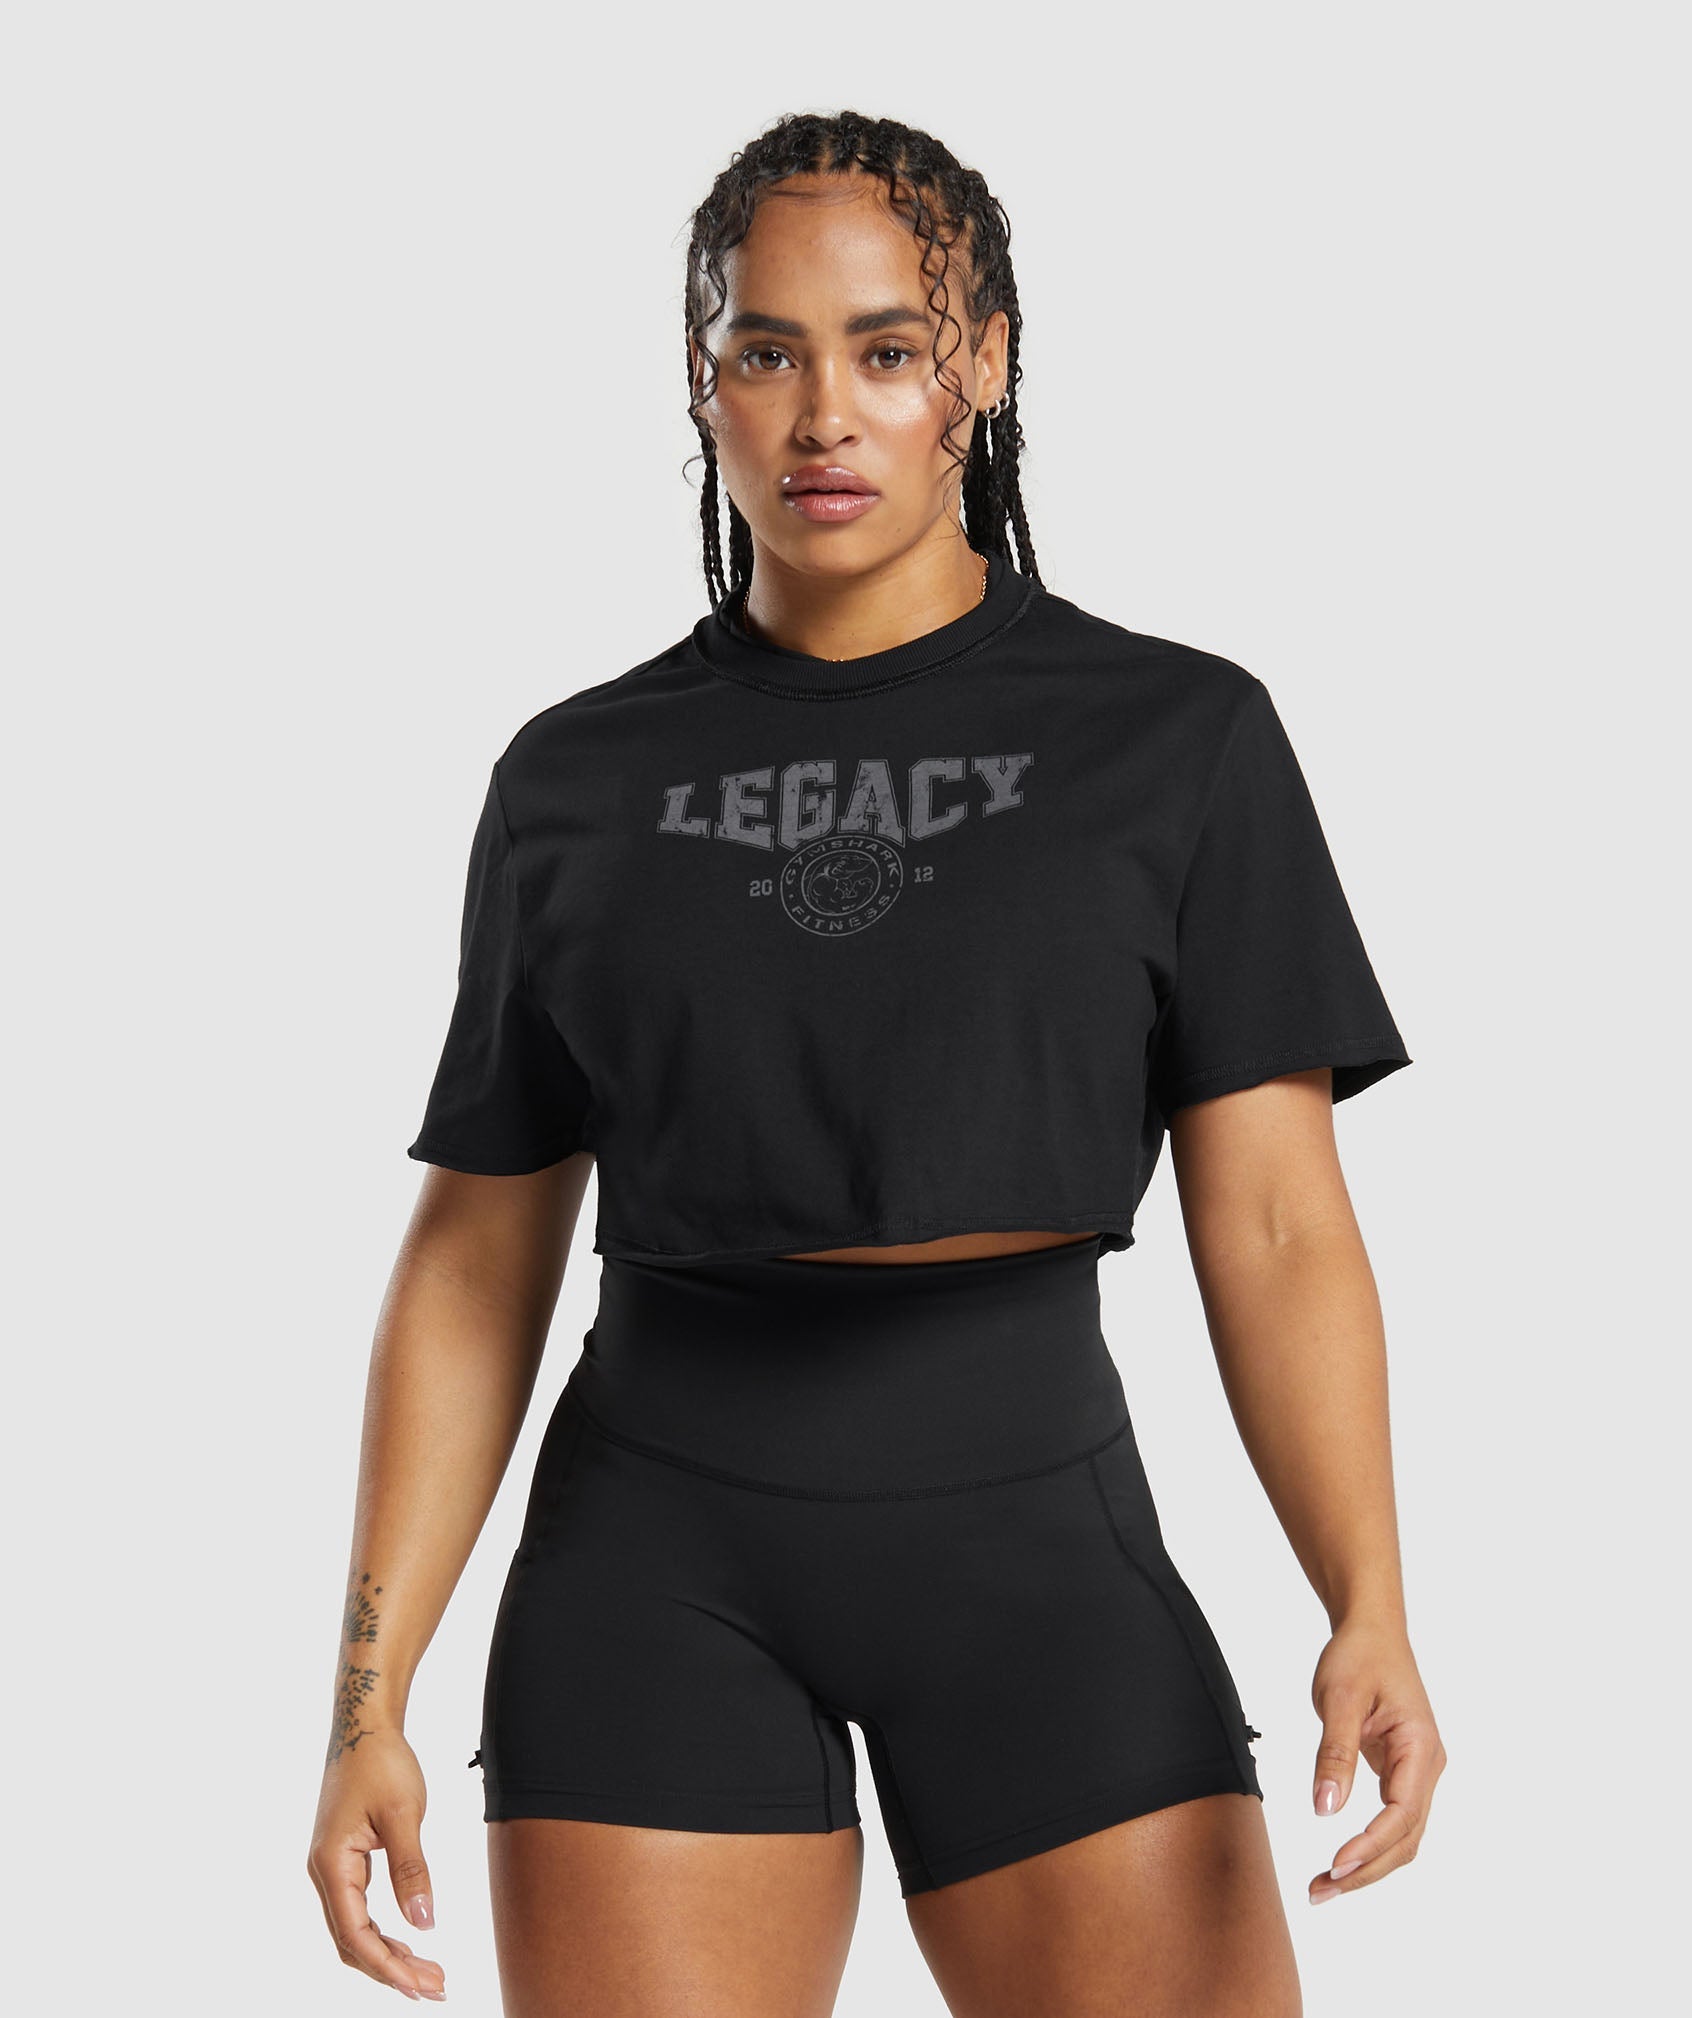 Legacy Graphic Crop Top in Black